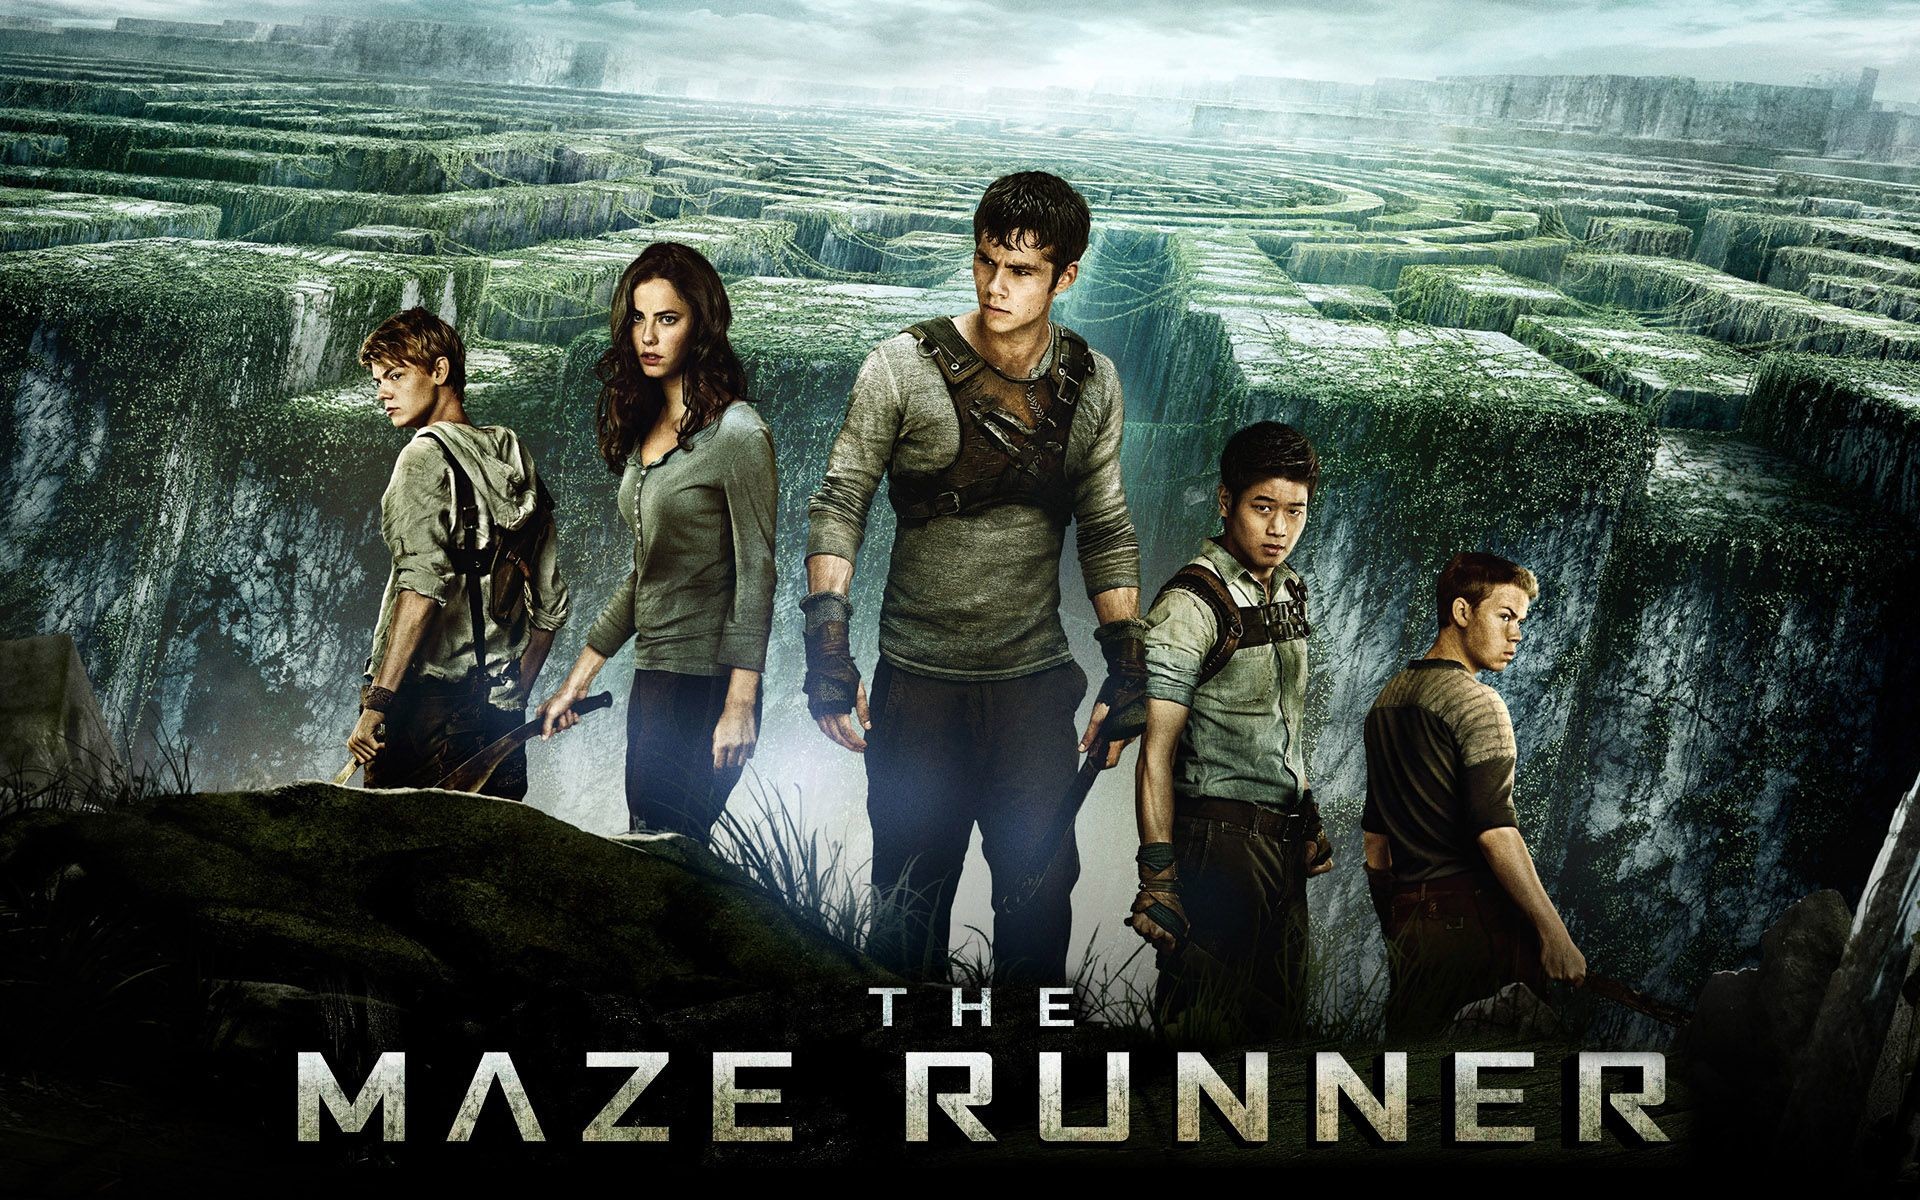 20+ Maze Runner: The Scorch Trials HD Wallpapers and Backgrounds